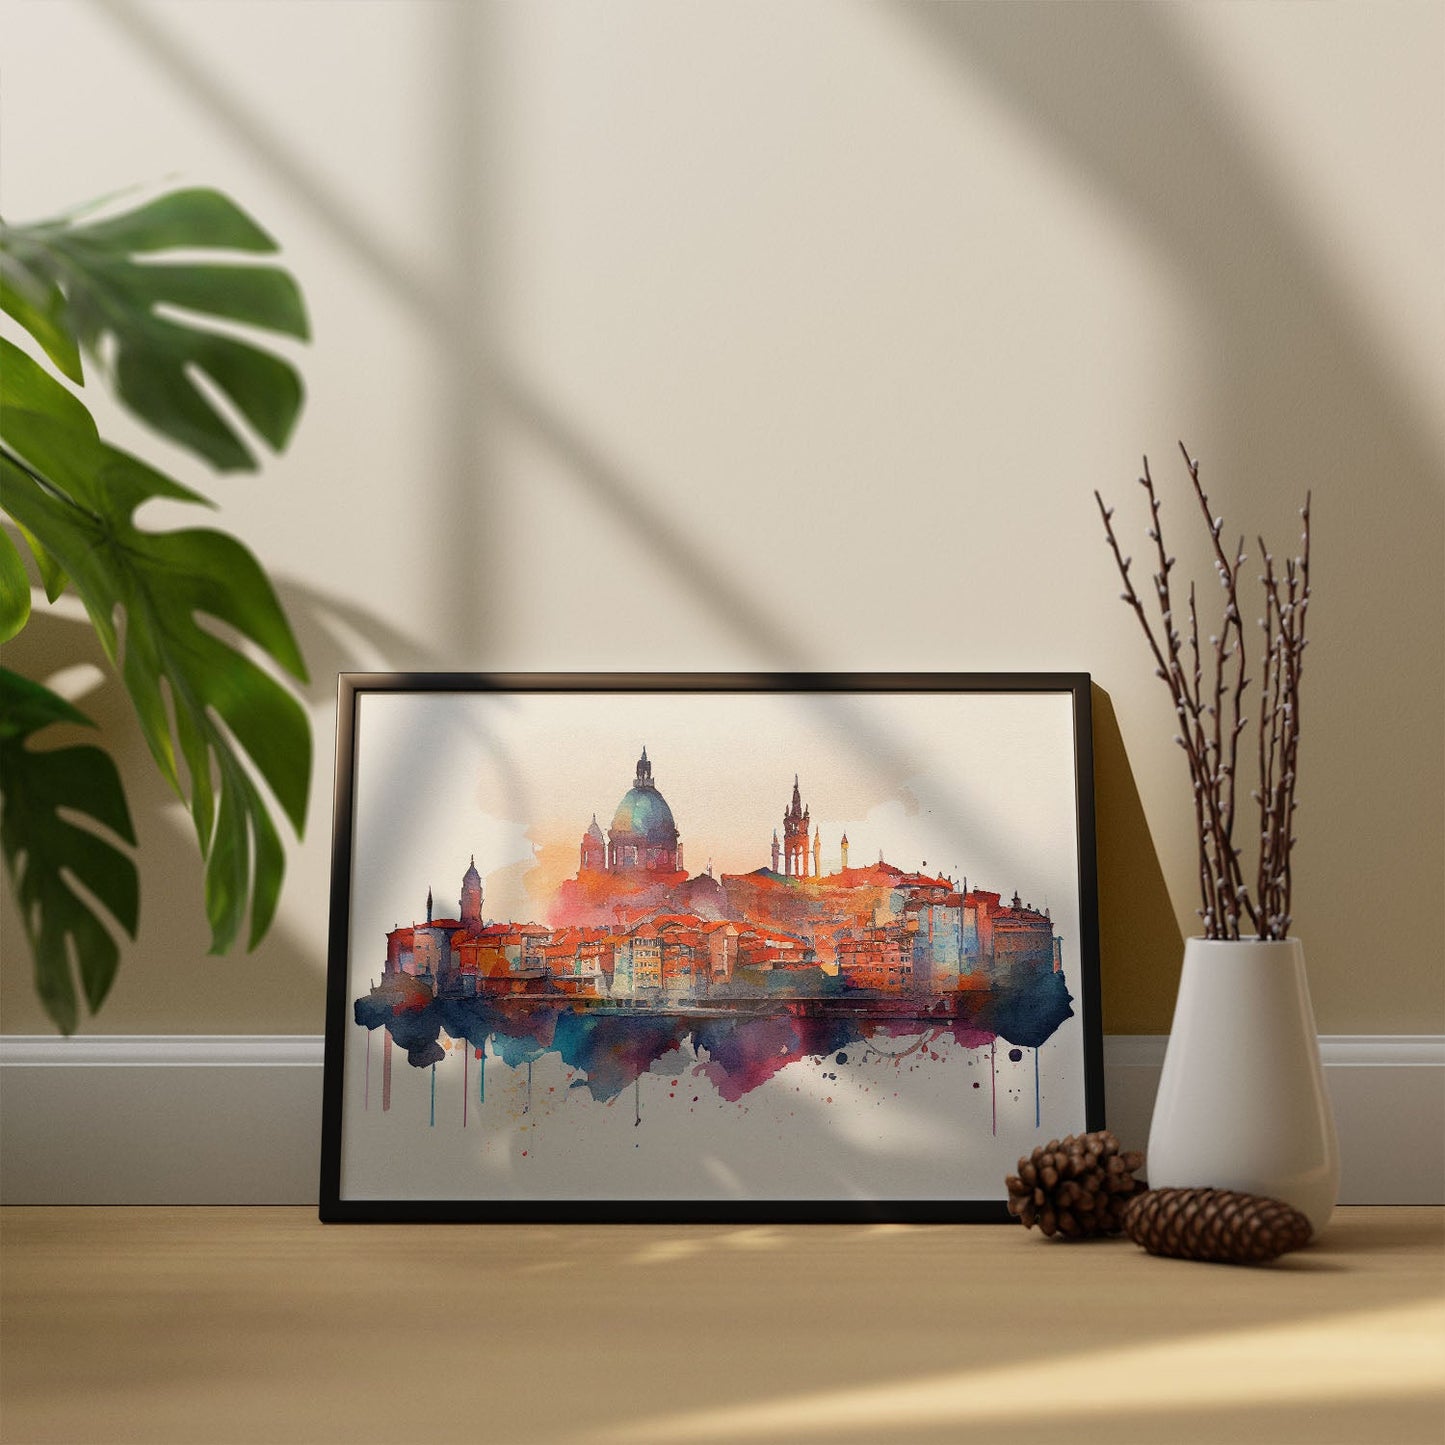 Nacnic watercolor of a skyline of the city of Porto. Aesthetic Wall Art Prints for Bedroom or Living Room Design.-Artwork-Nacnic-A4-Sin Marco-Nacnic Estudio SL